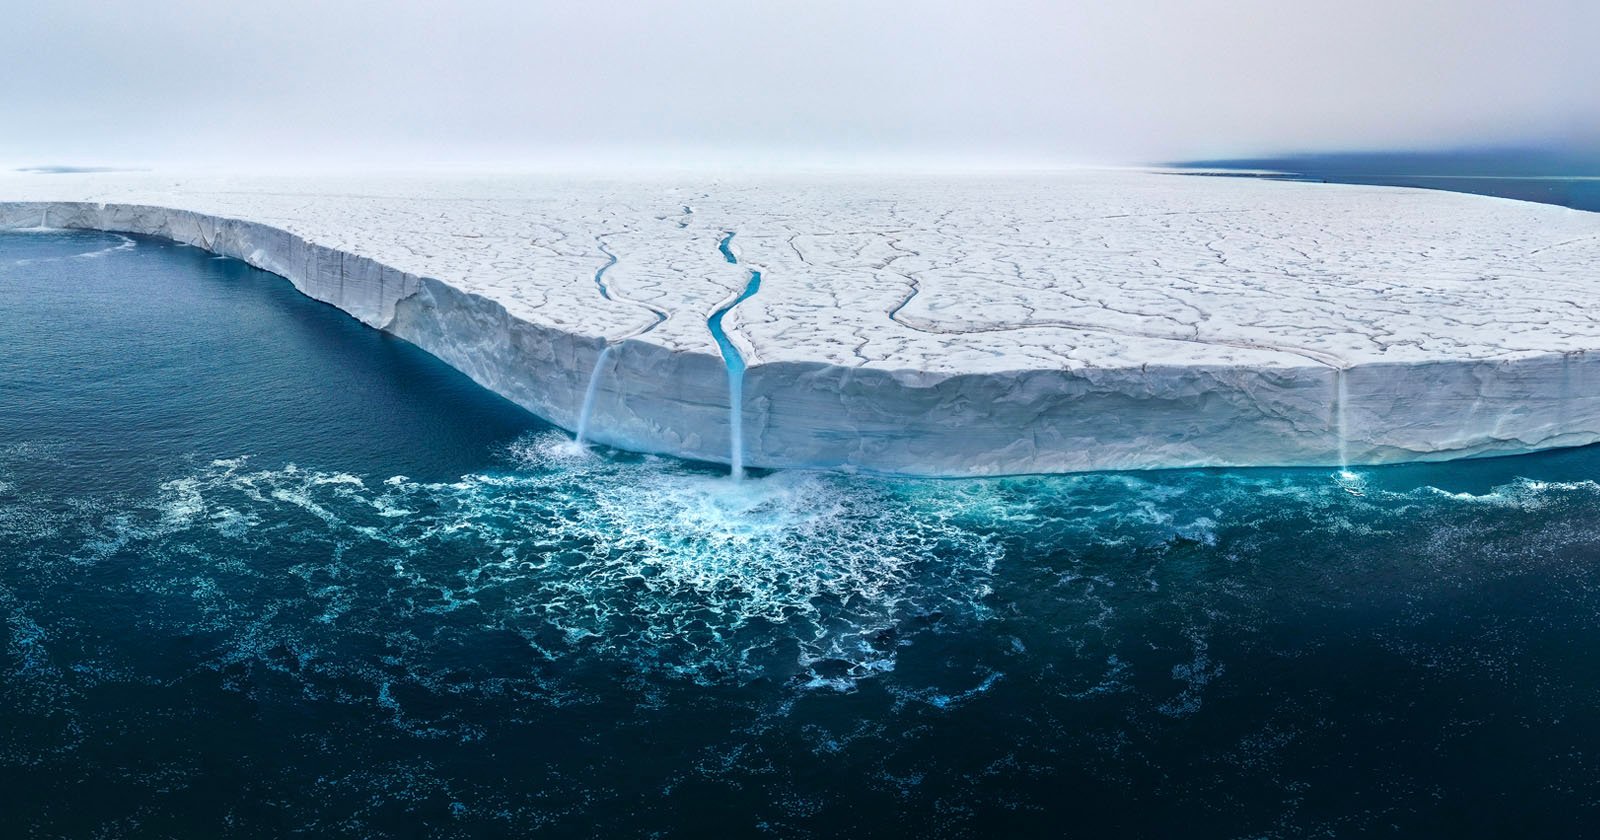 Alarming Image of Ice Cap Bleeding into the Sea Wins Photo Competition